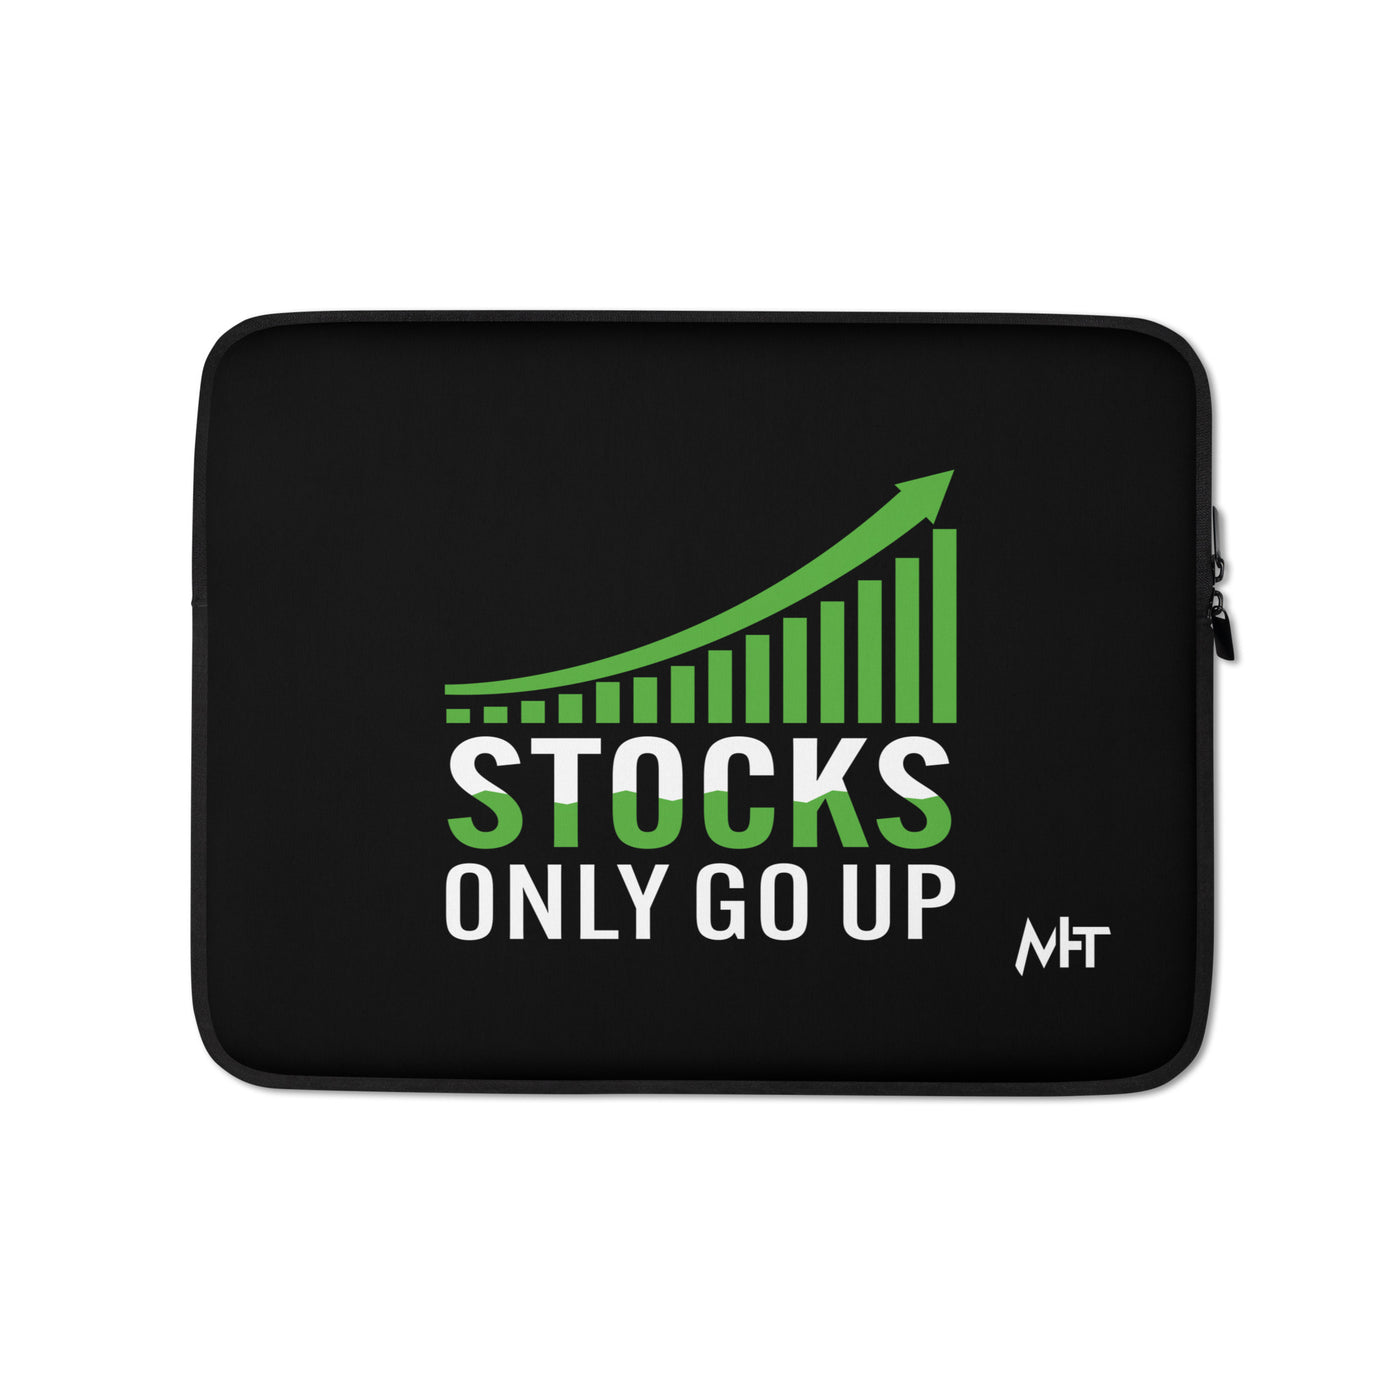 Stocks only Go up - Laptop Sleeve